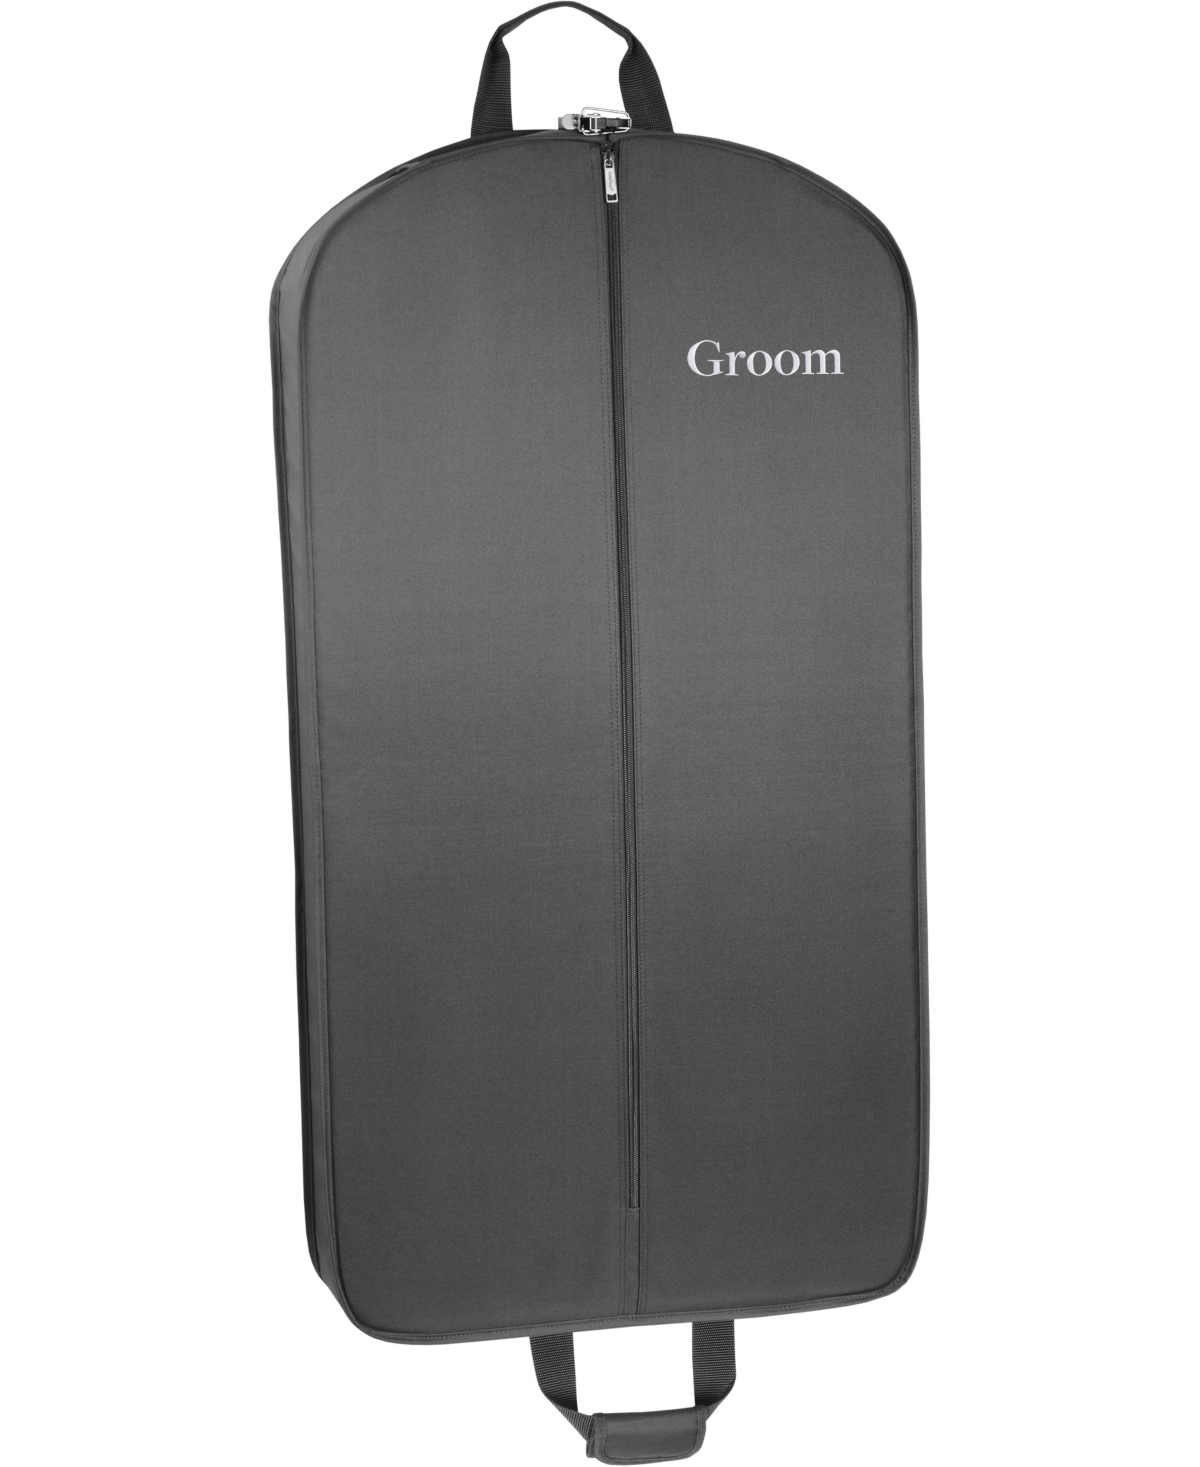 Wallybags 40" Deluxe Travel Garment Bag With Two Pockets And Groom Embroidery In Black - G